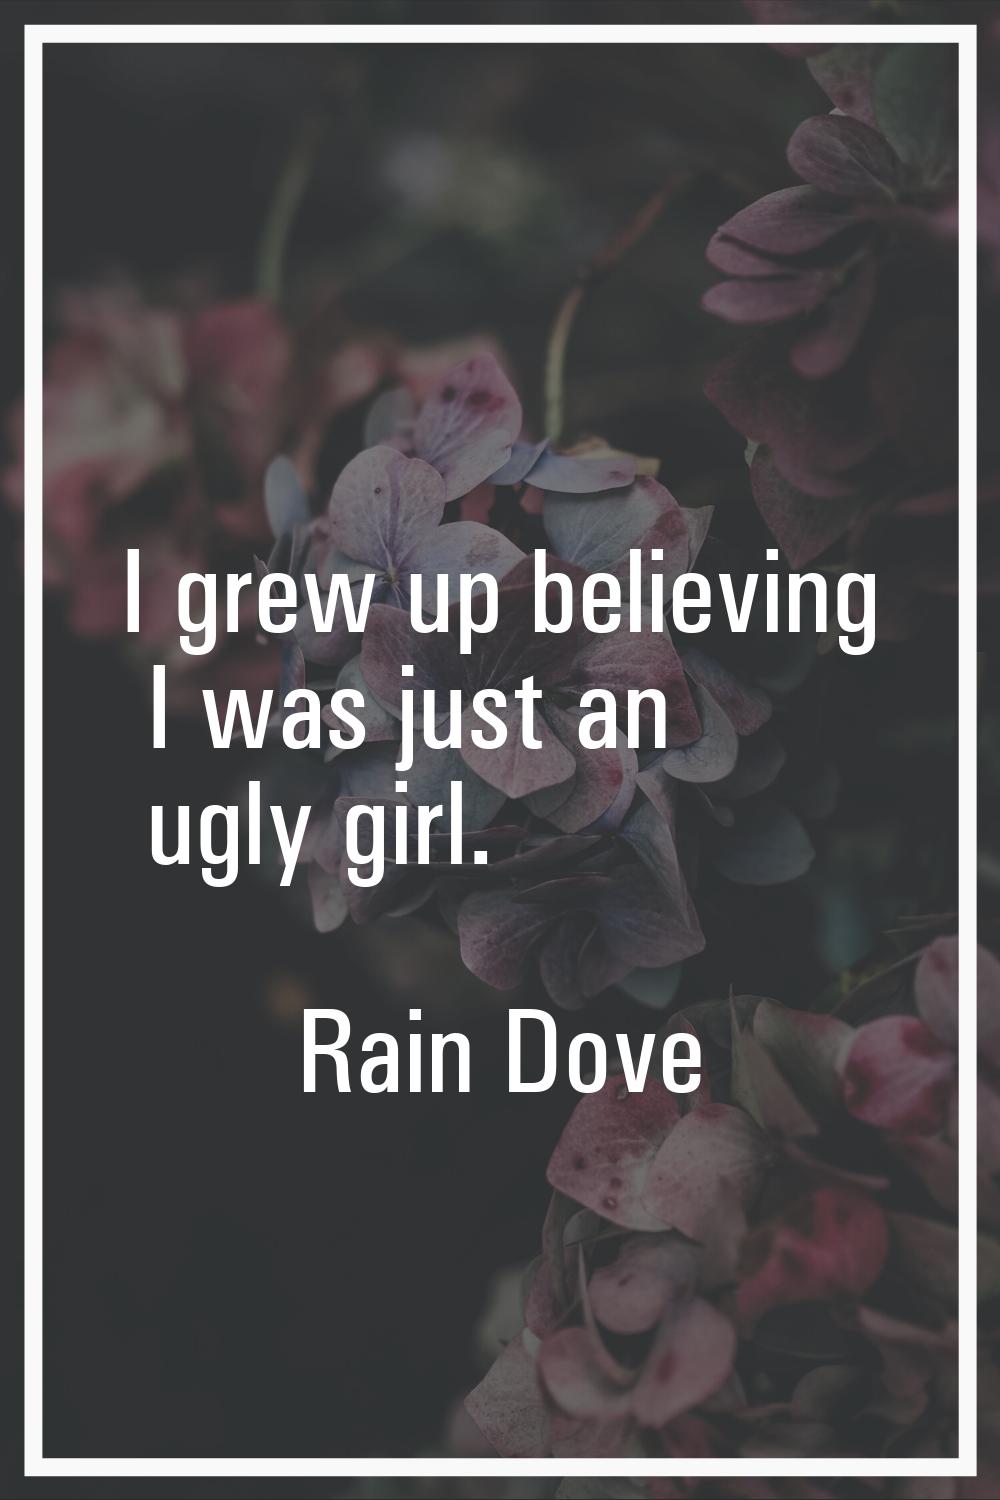 I grew up believing I was just an ugly girl.